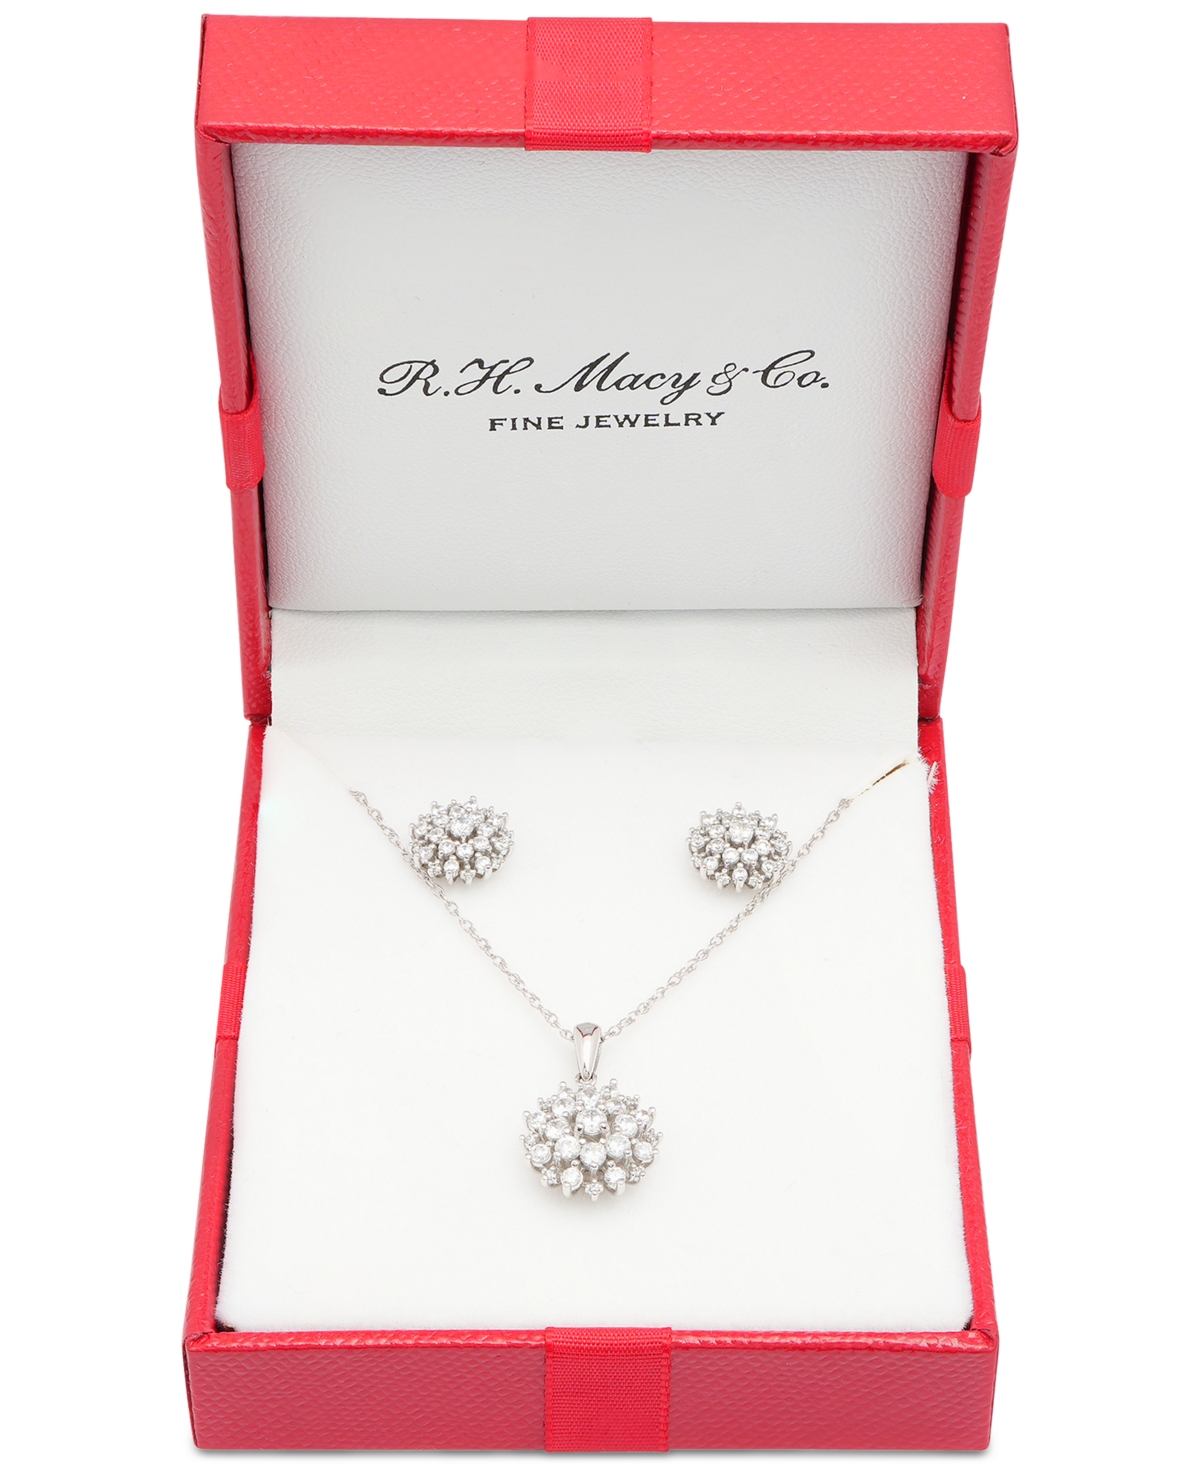 2-Pc. Set Diamond Cluster Pendant Necklace & Matching Stud Earrings (1 ct. t.w.) in 14k White Gold, Created for Macy's - White Gold